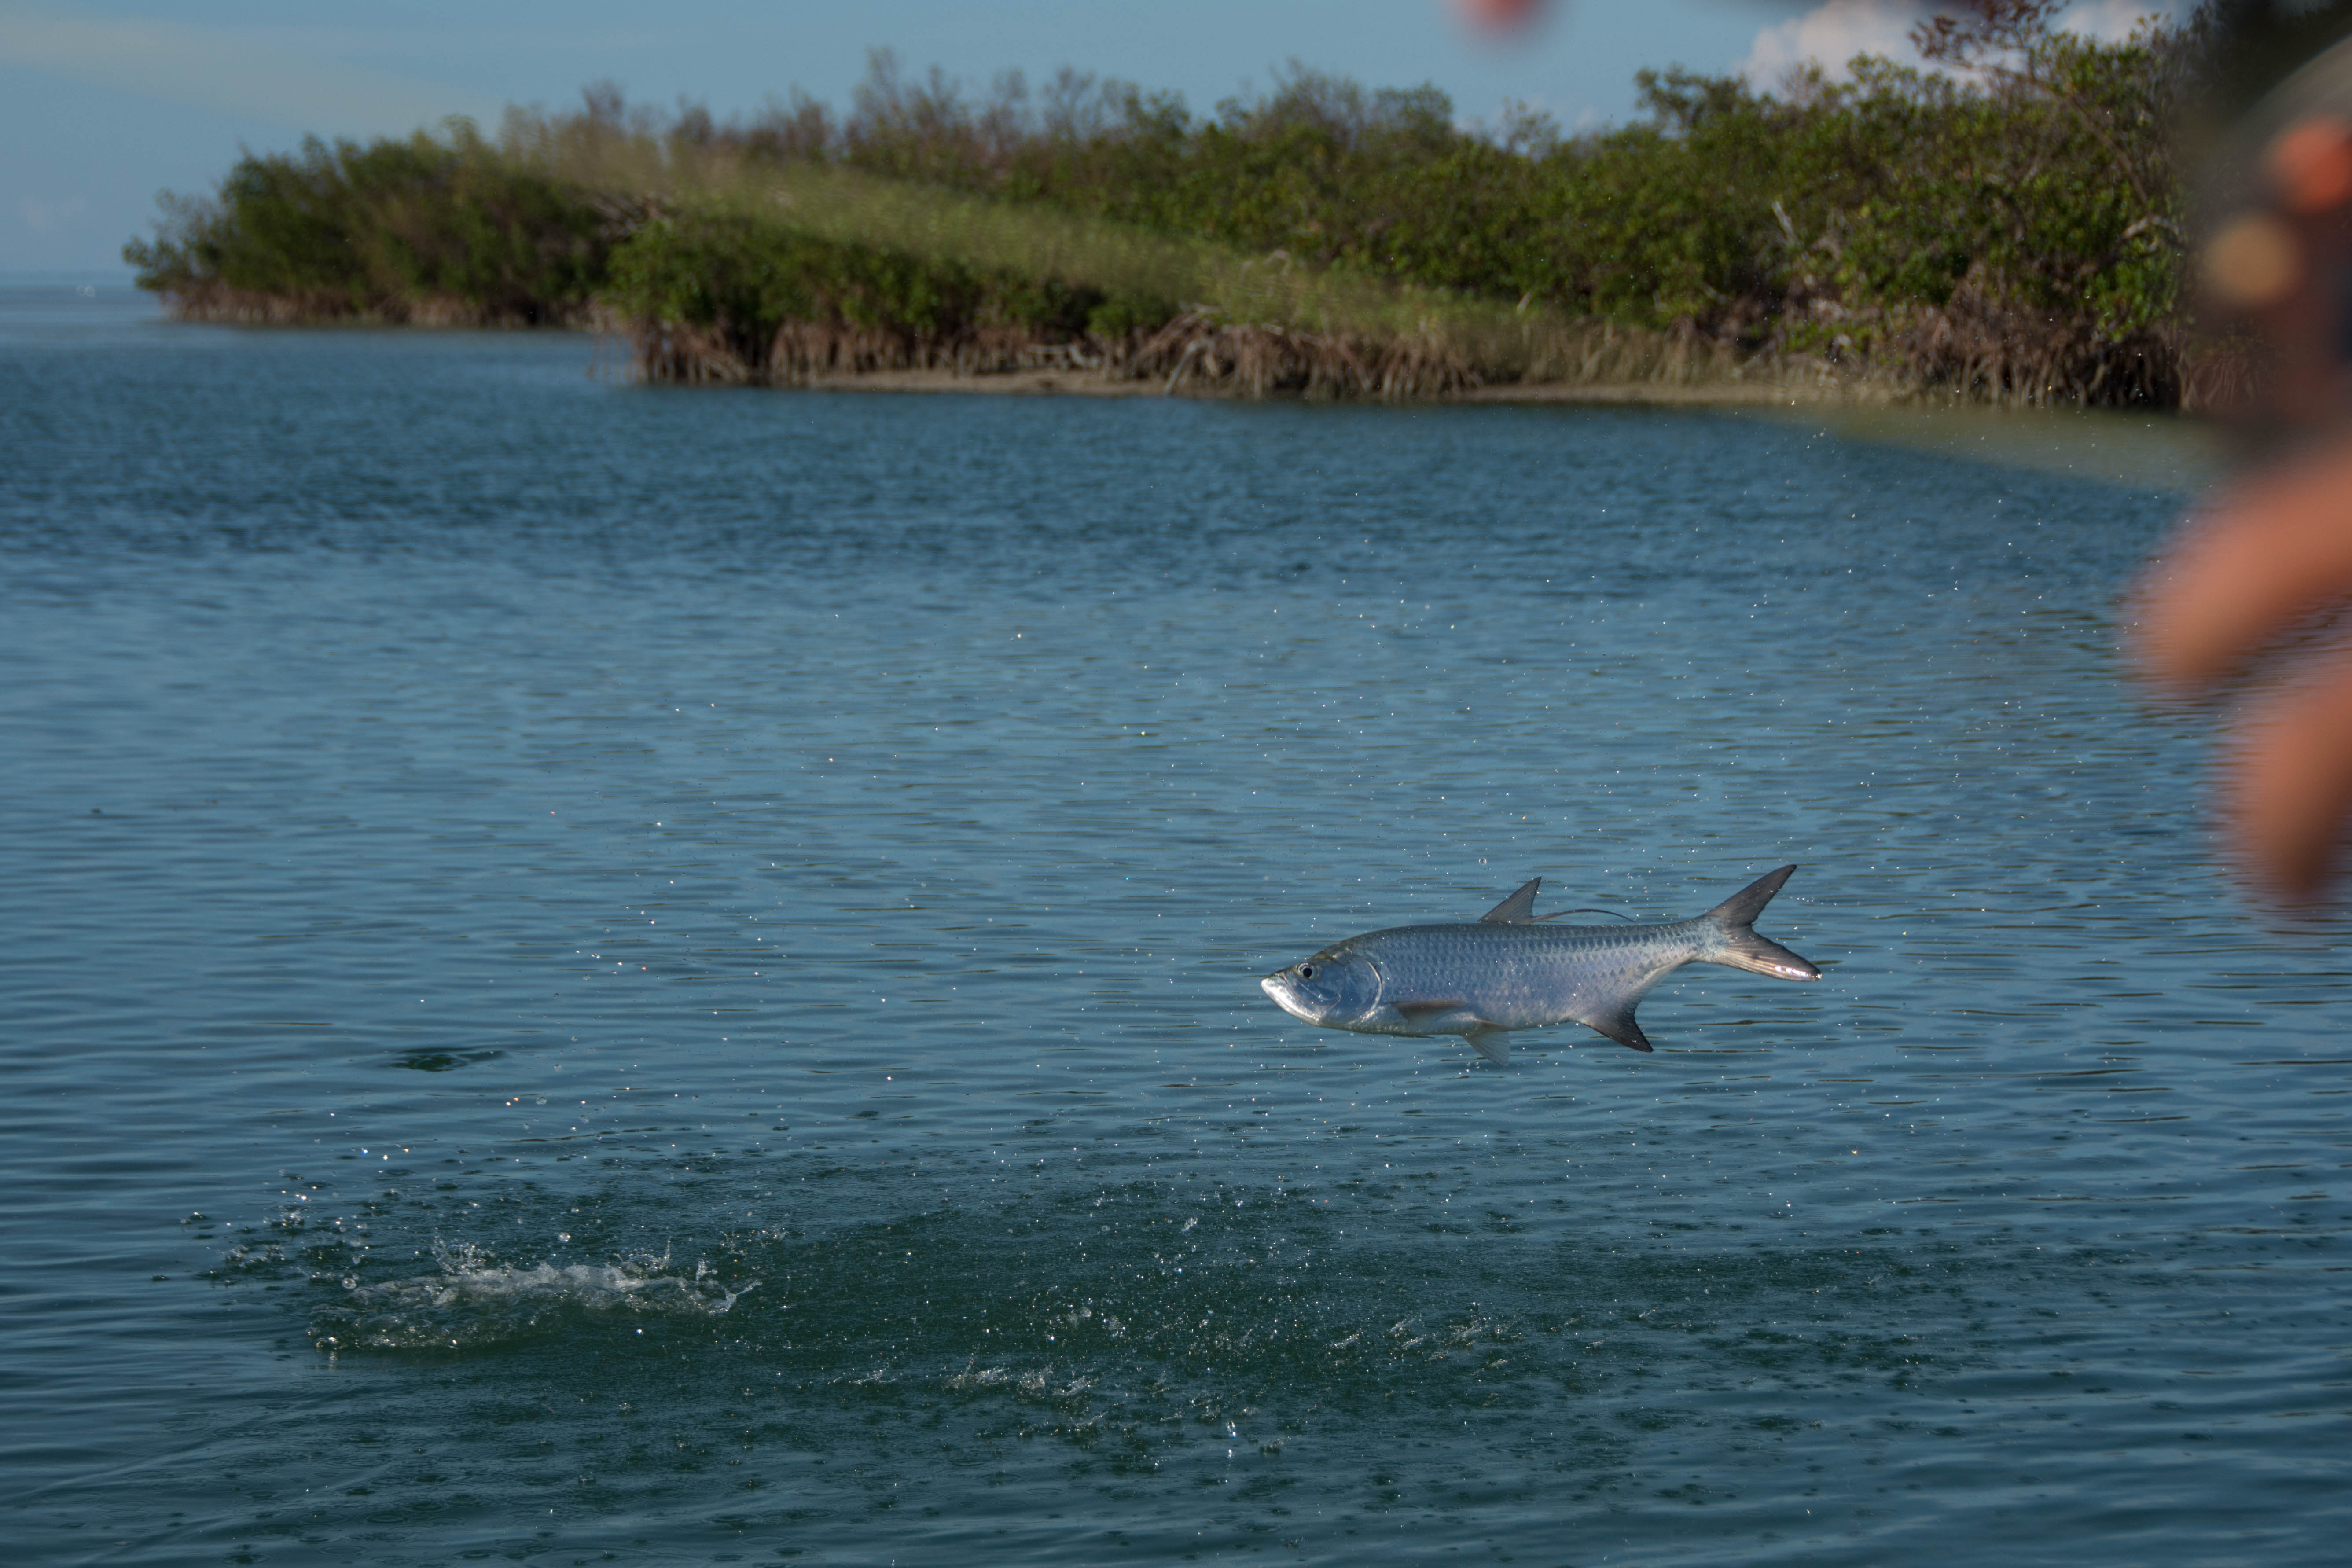 A fun sized tarpon is jumping out of the water next to some mangroves after being hooked on a fly rod.